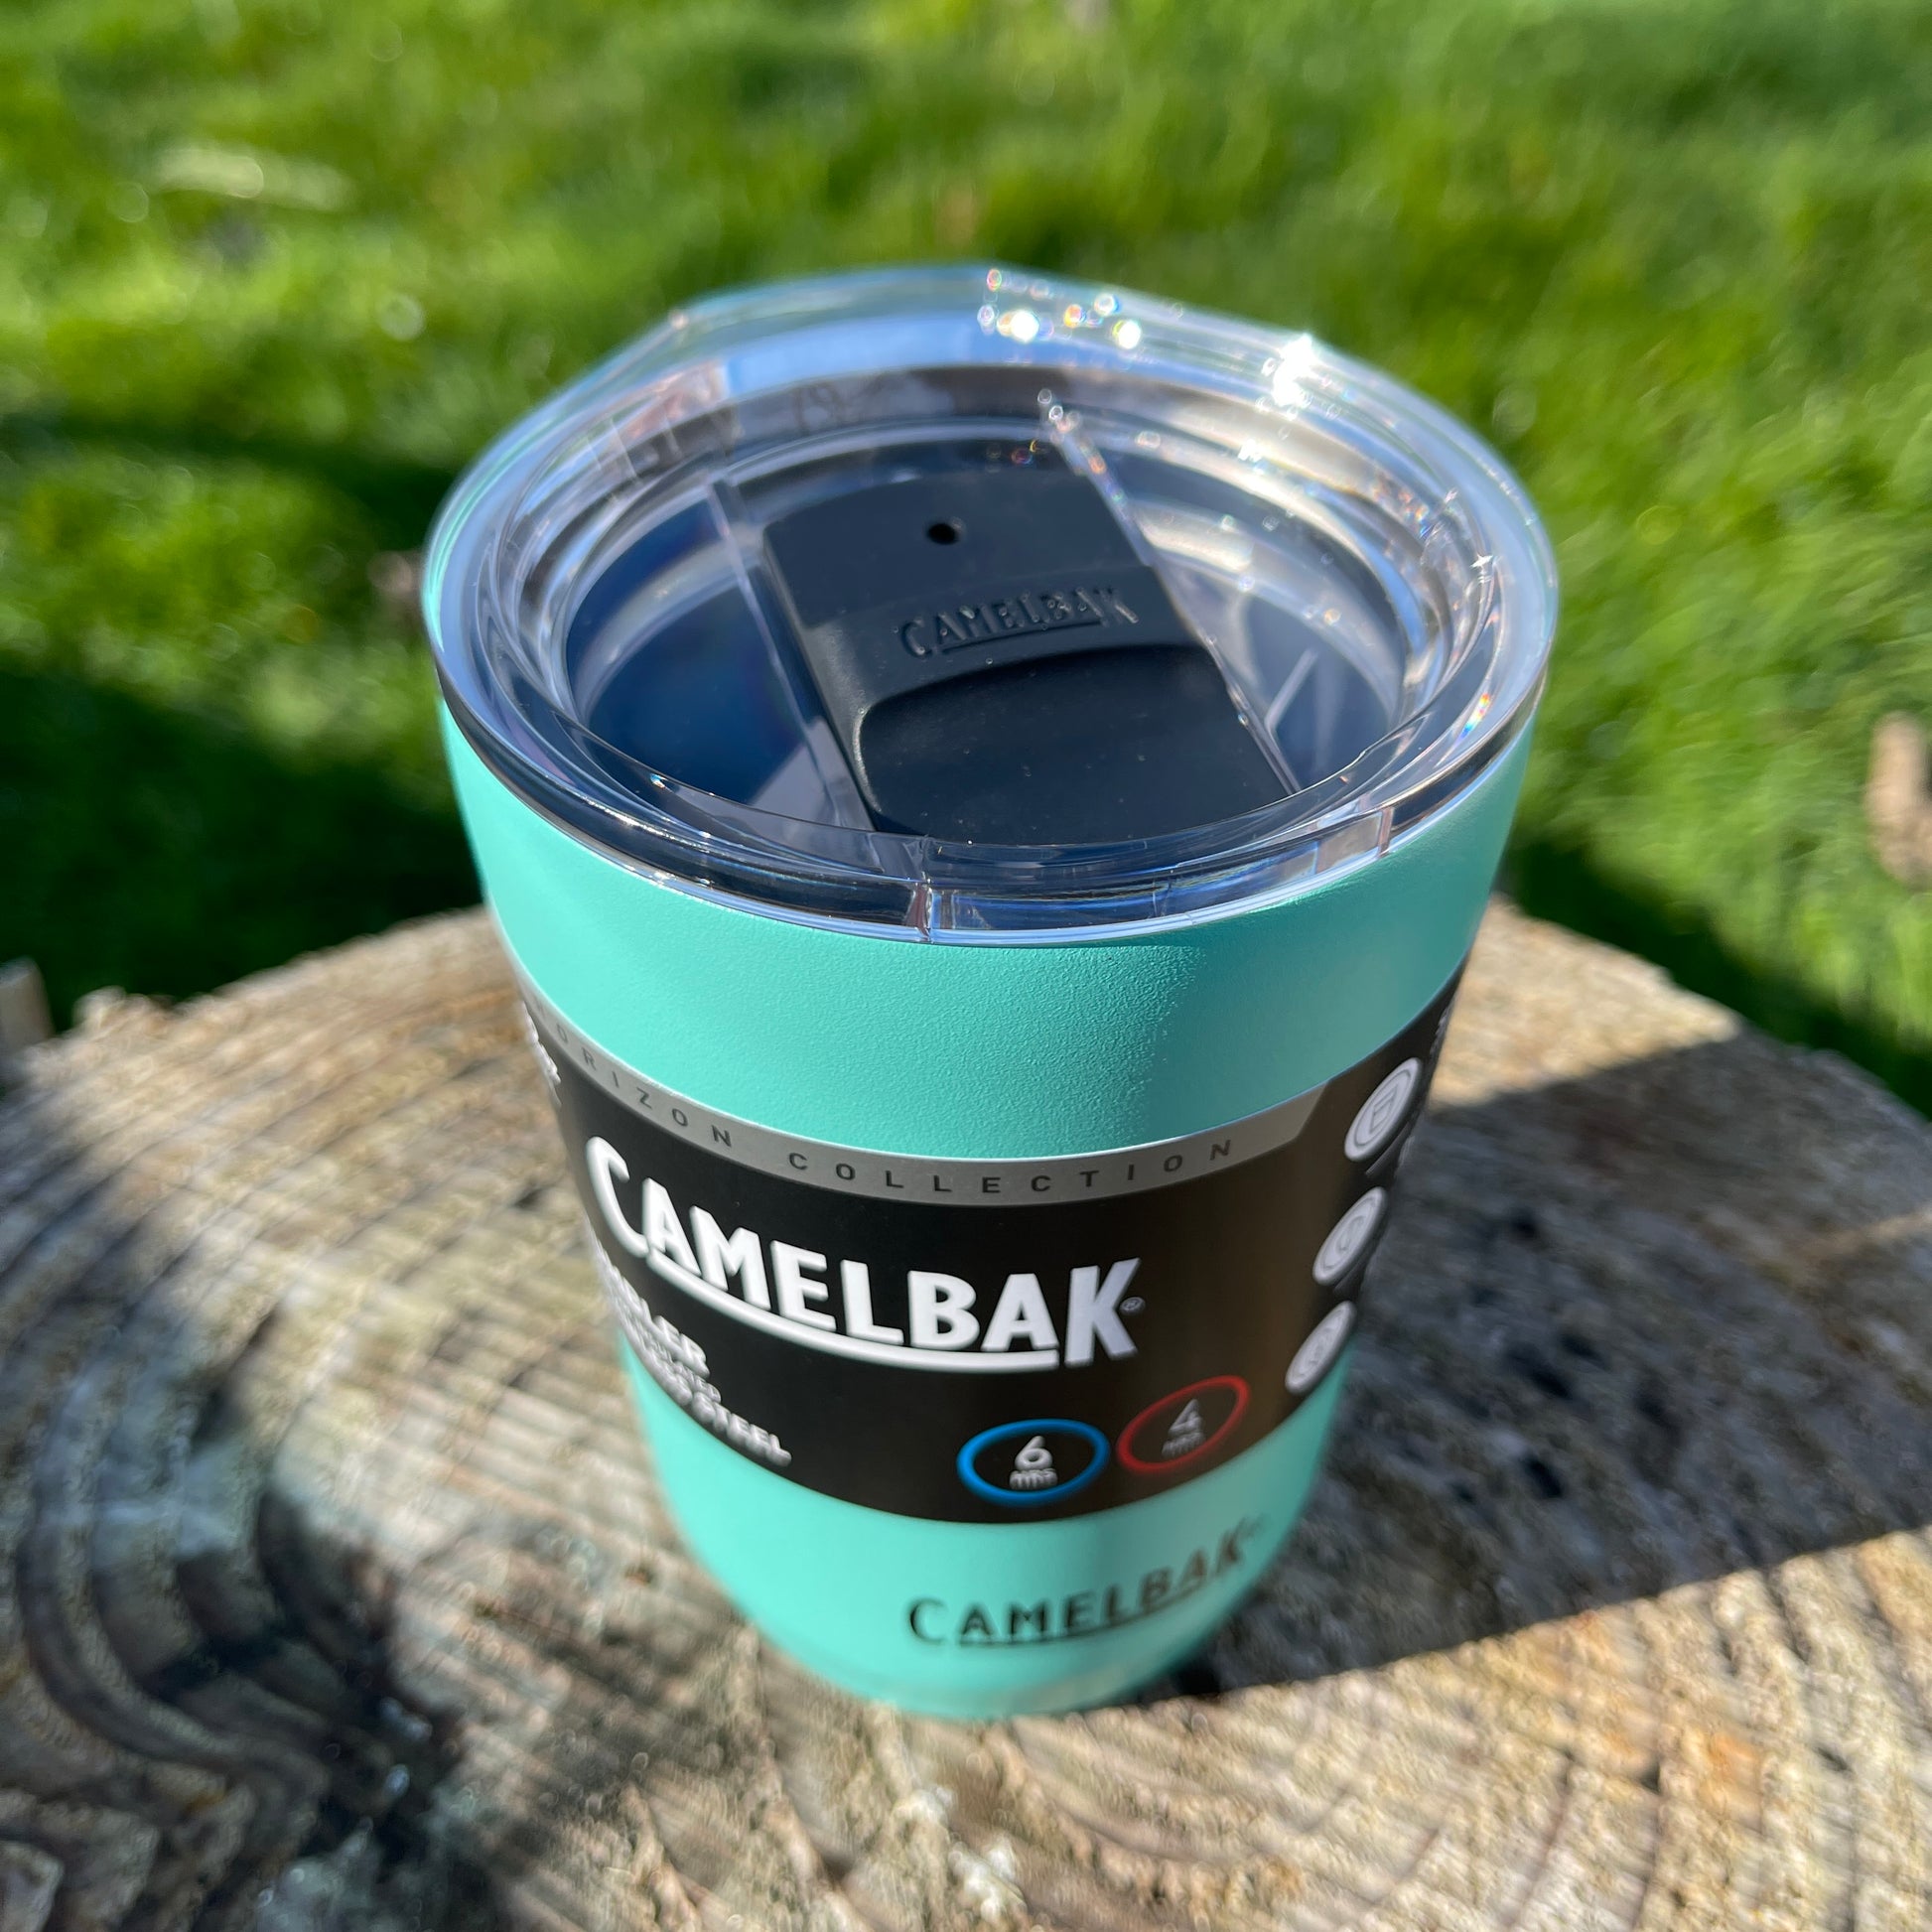 Stainless steel coffee tumbler from Camelbak in blue coastal colour.